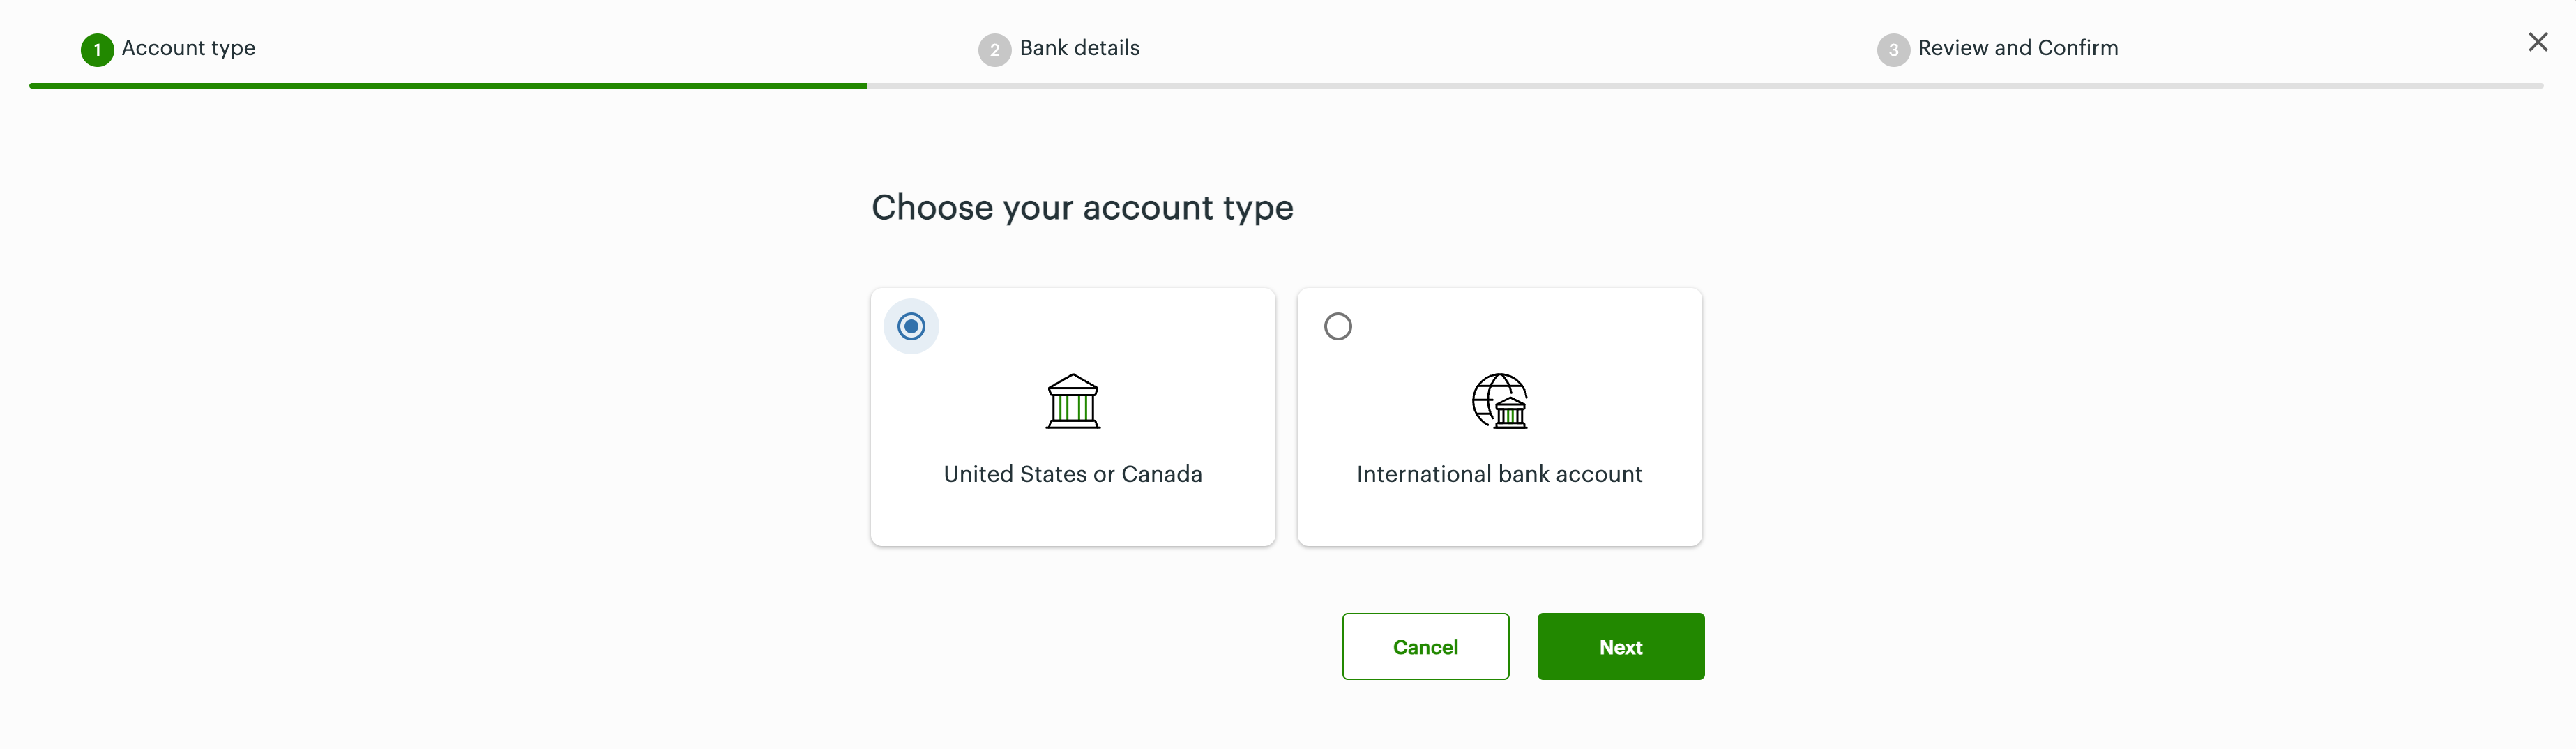 Choose your account type: United States or Canada